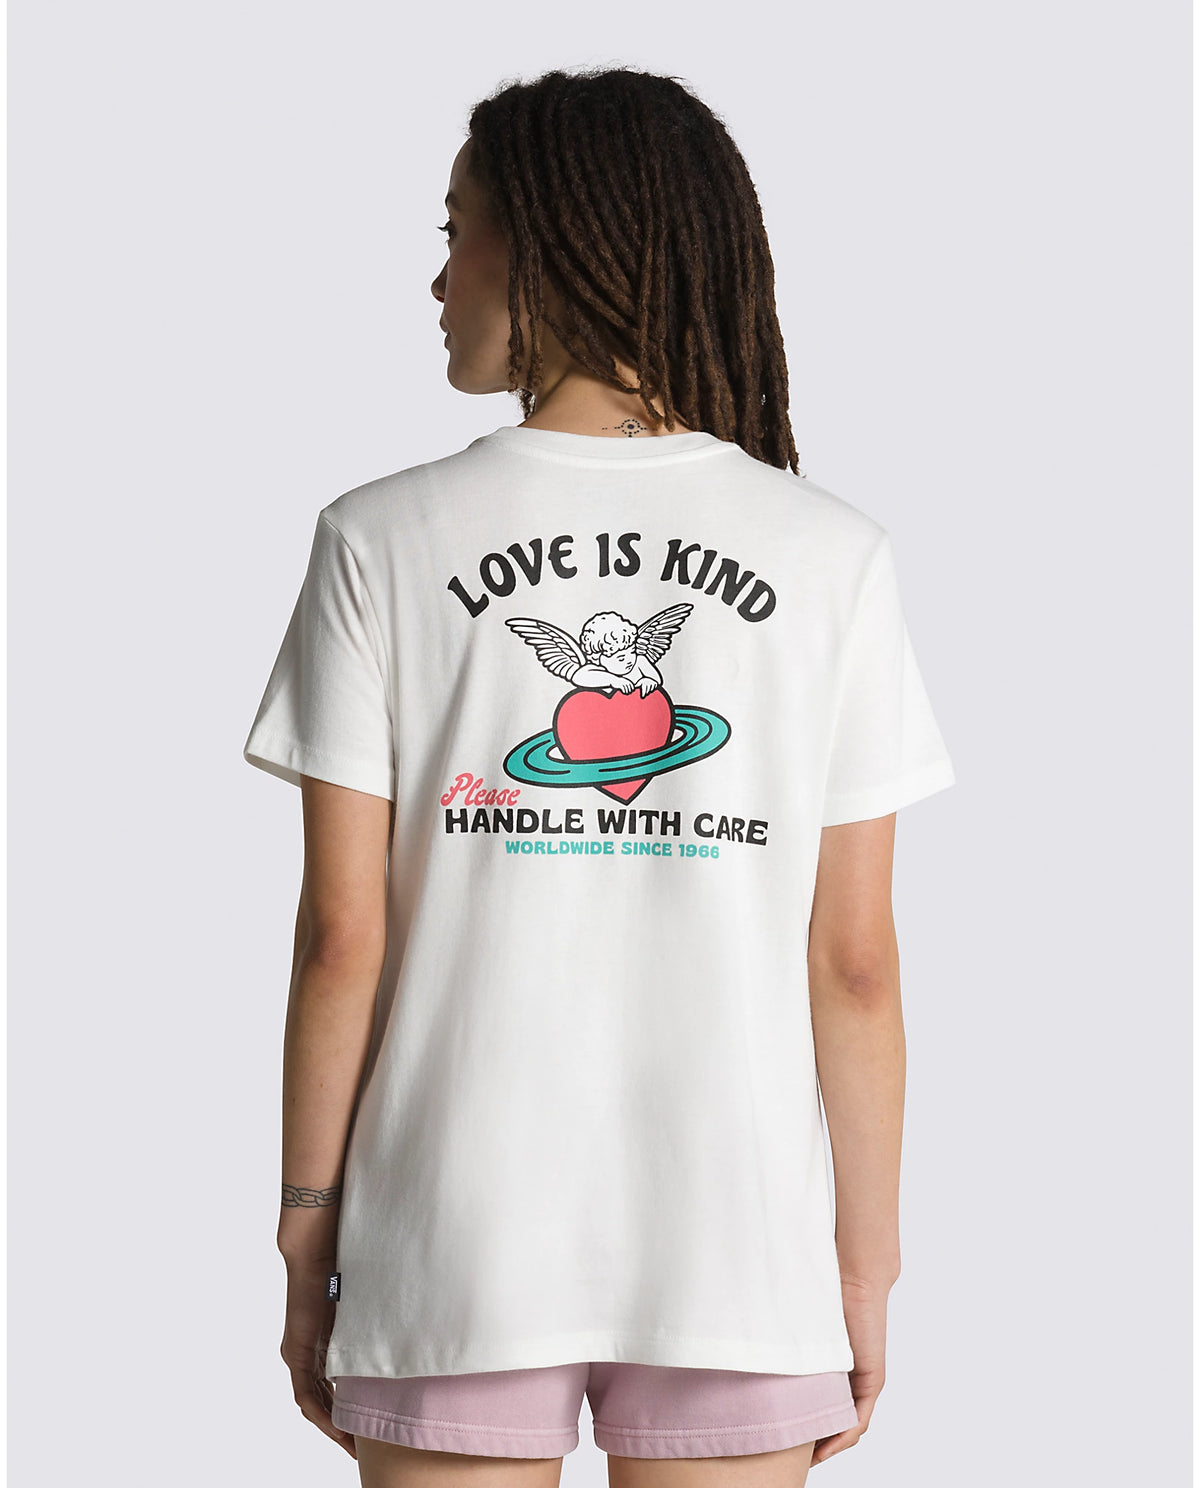 Love is Kind T-Shirt